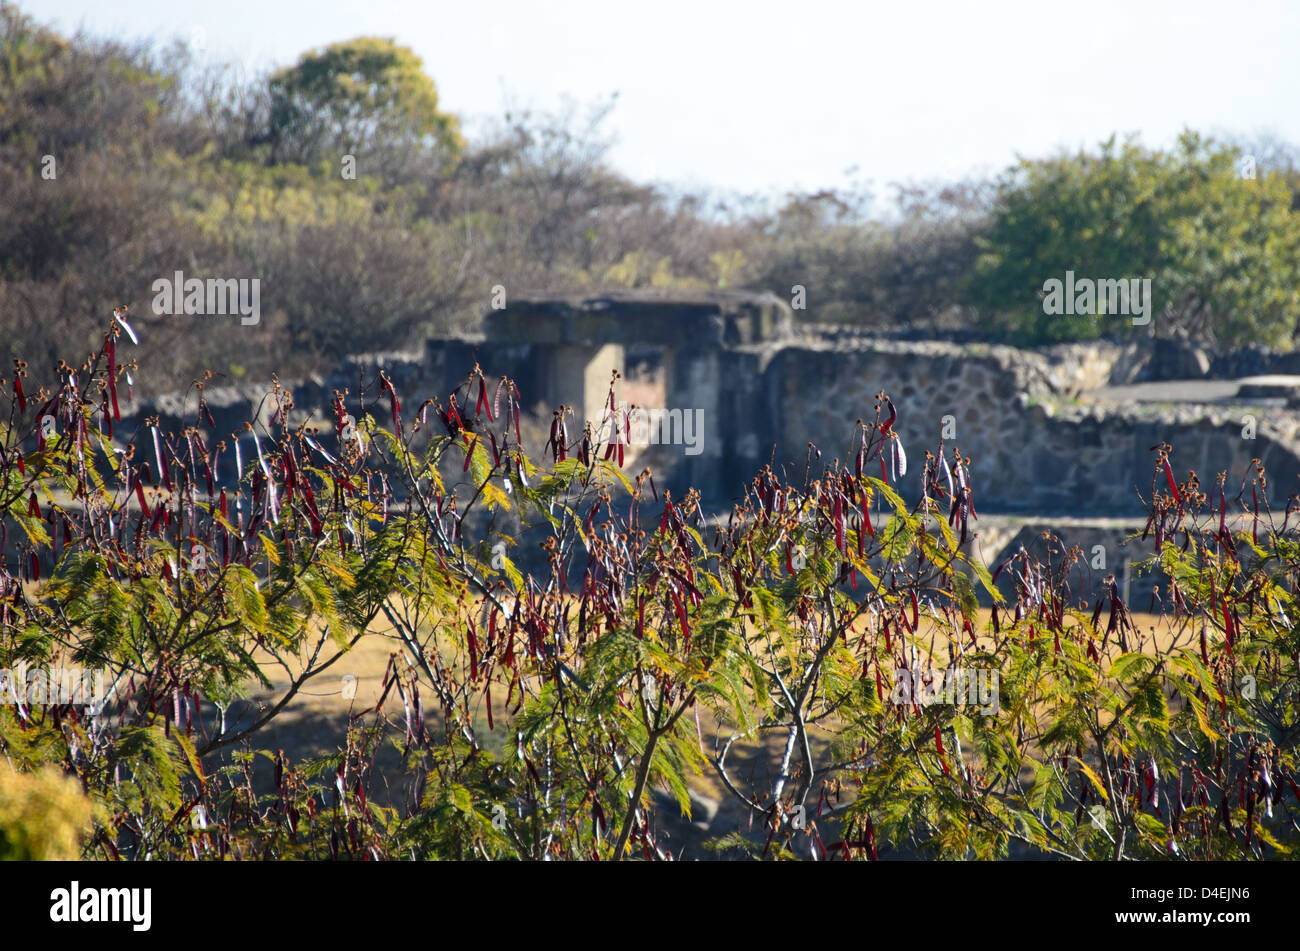 Guaje trees full of red seedpods in front of the ruins of Tomb 7, Monte Alban, Mexico Stock Photo